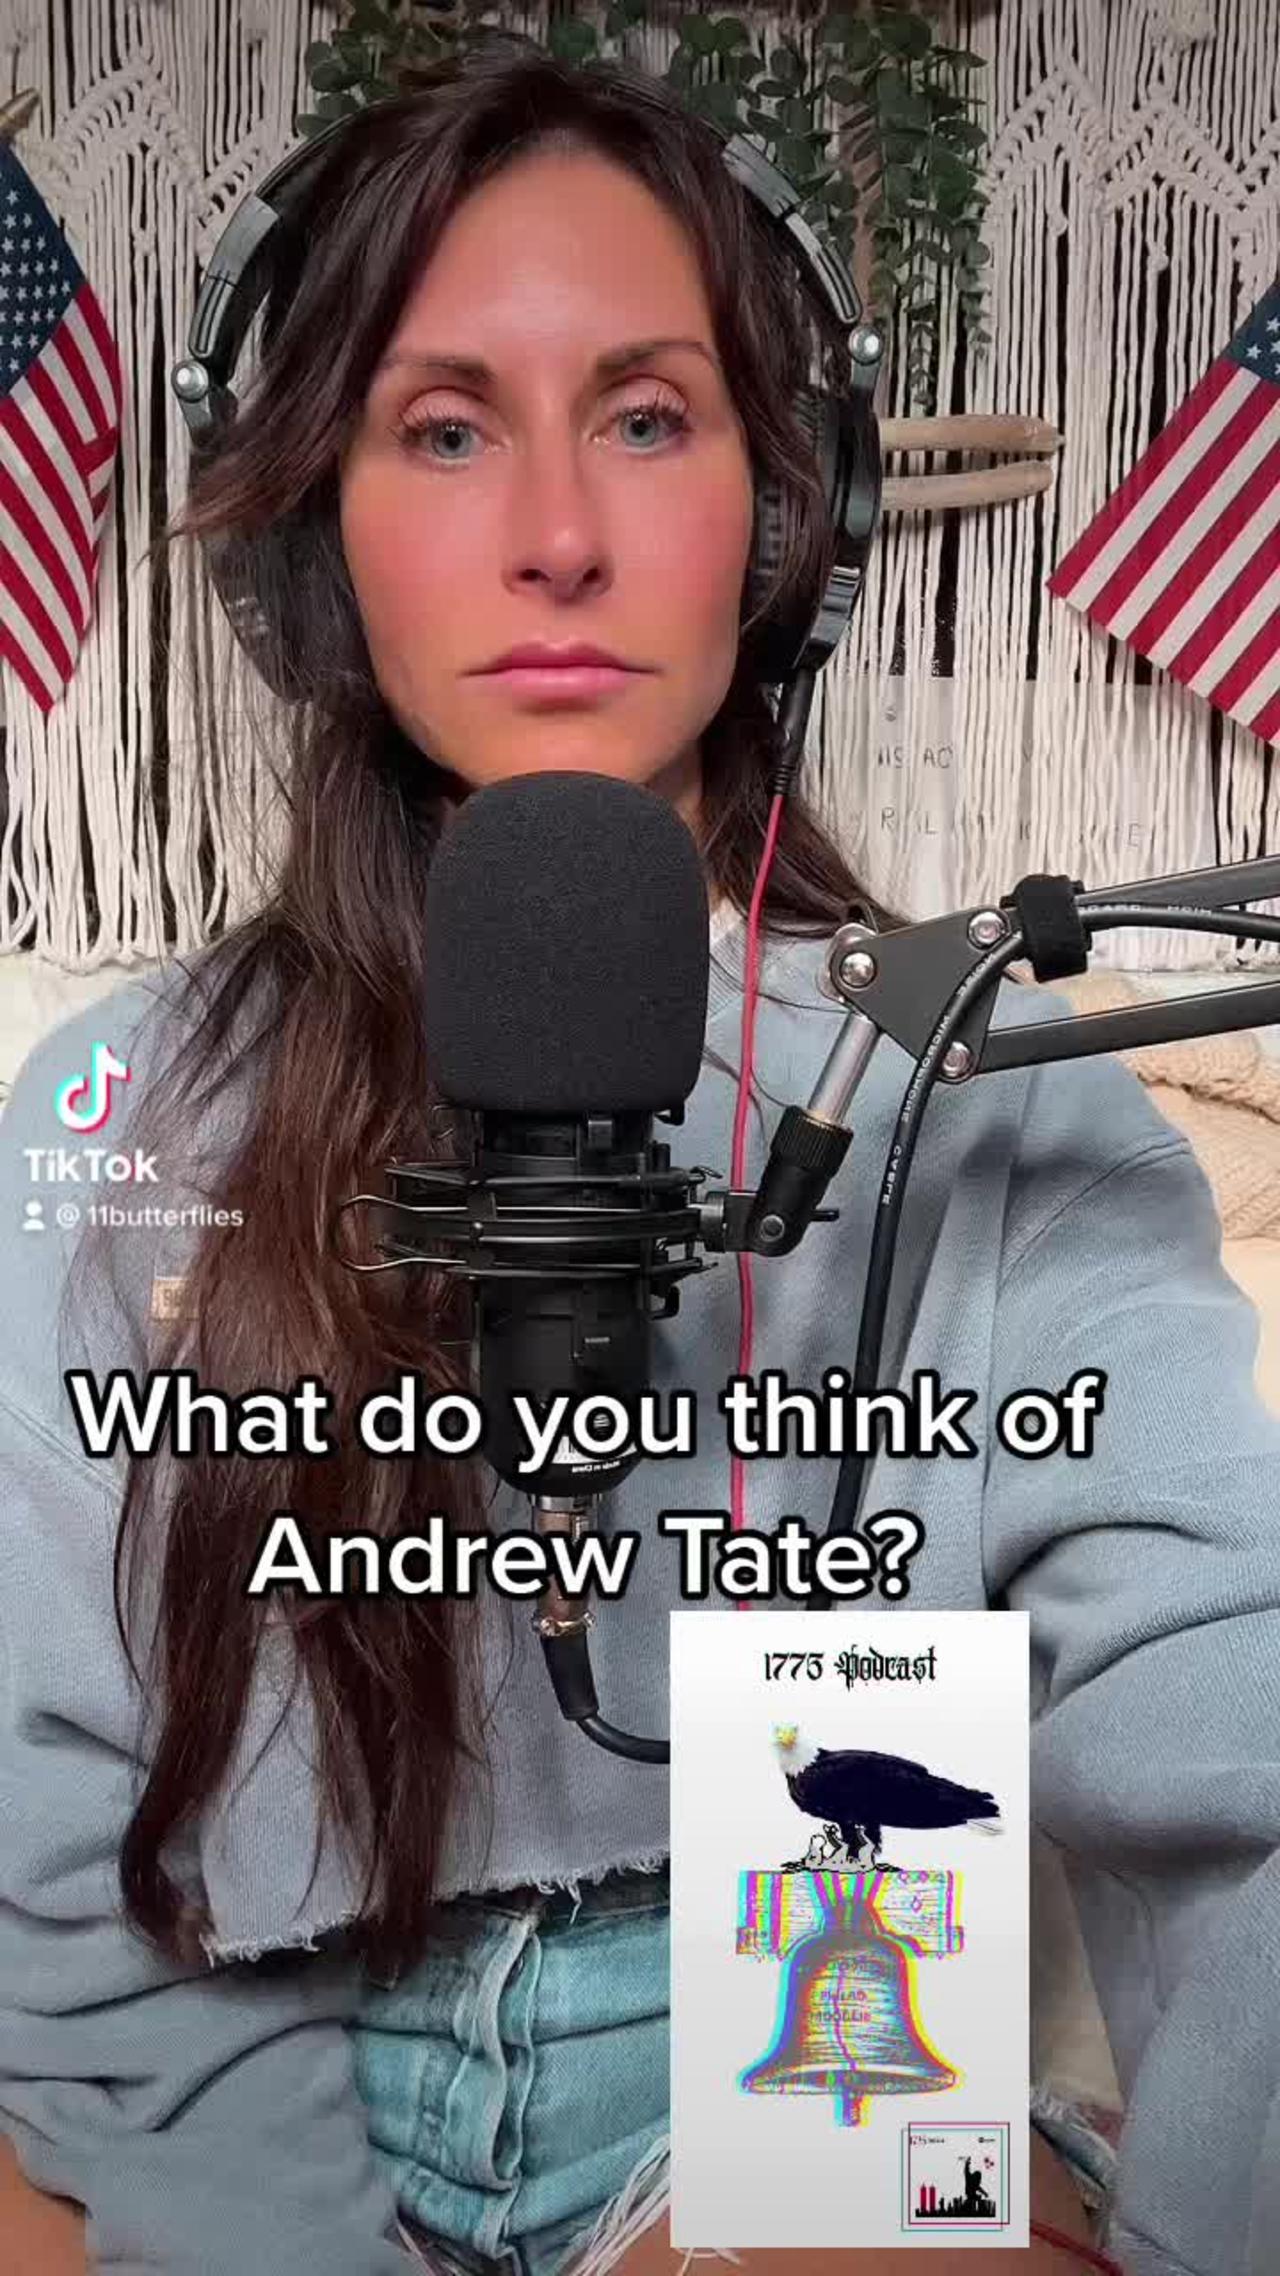 Opinion on Andrew tate